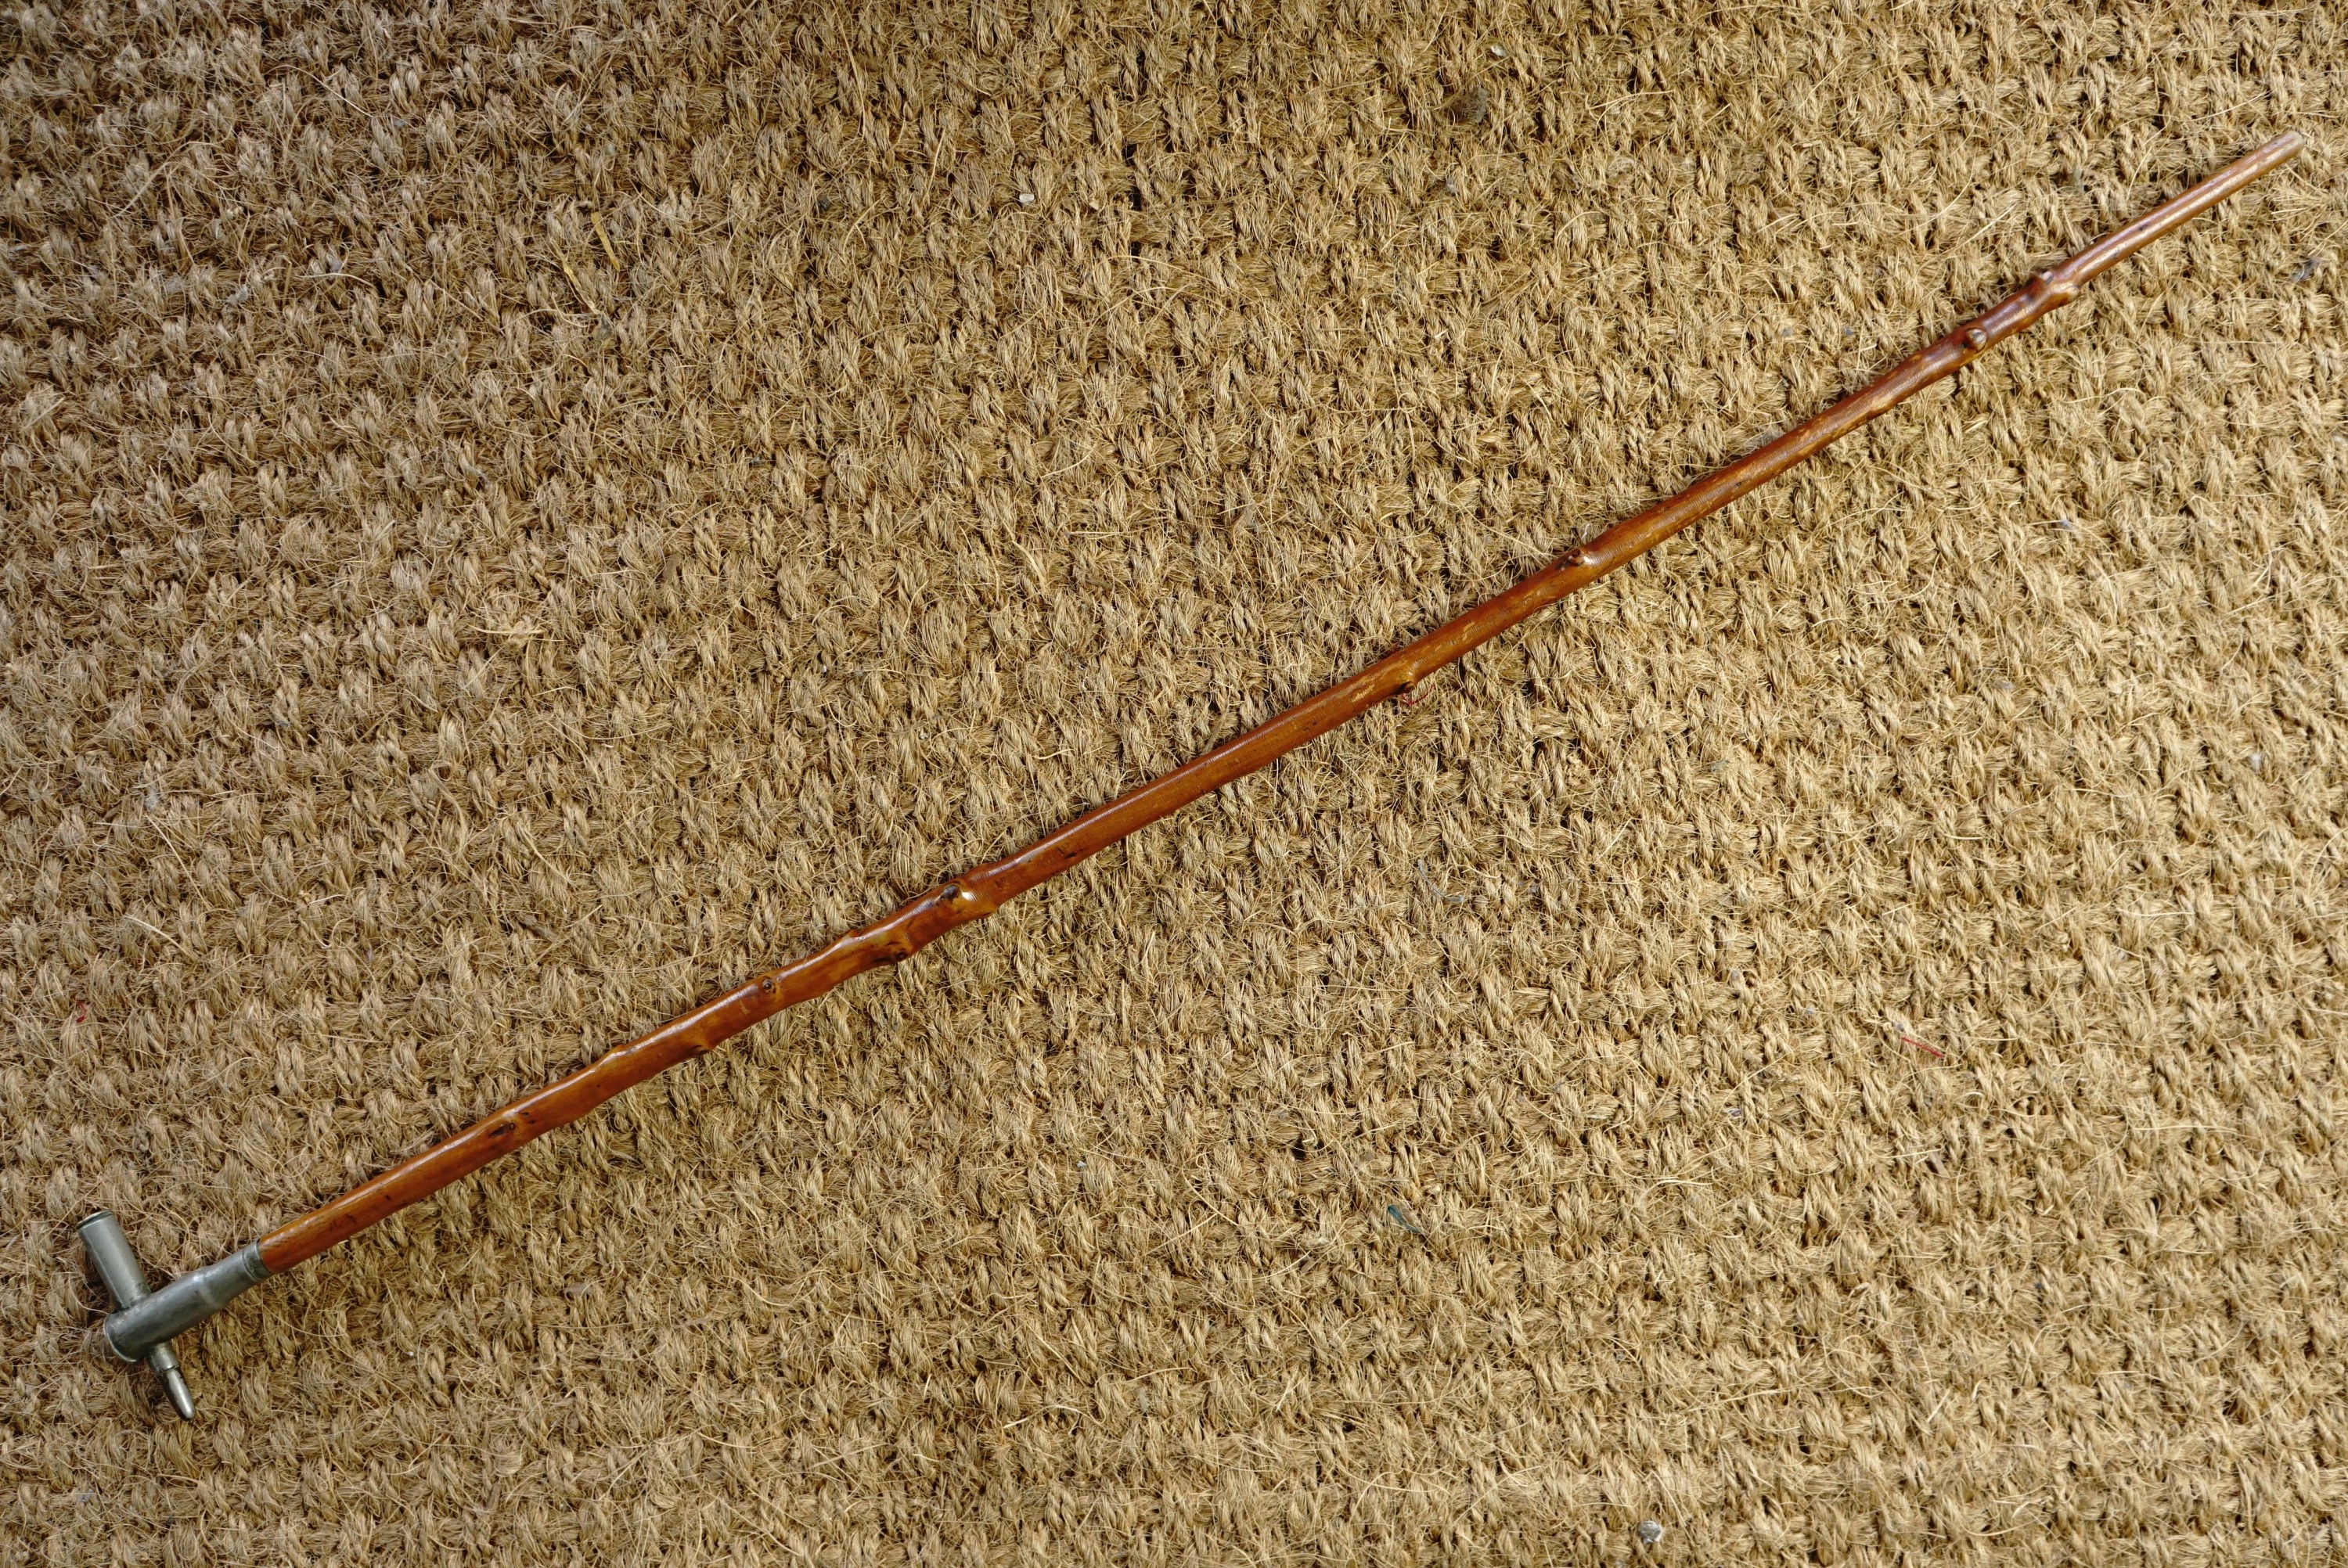 A Boer War swagger cane, its pommel fabricated from an 1899 Mauser cartridge and a British army .577